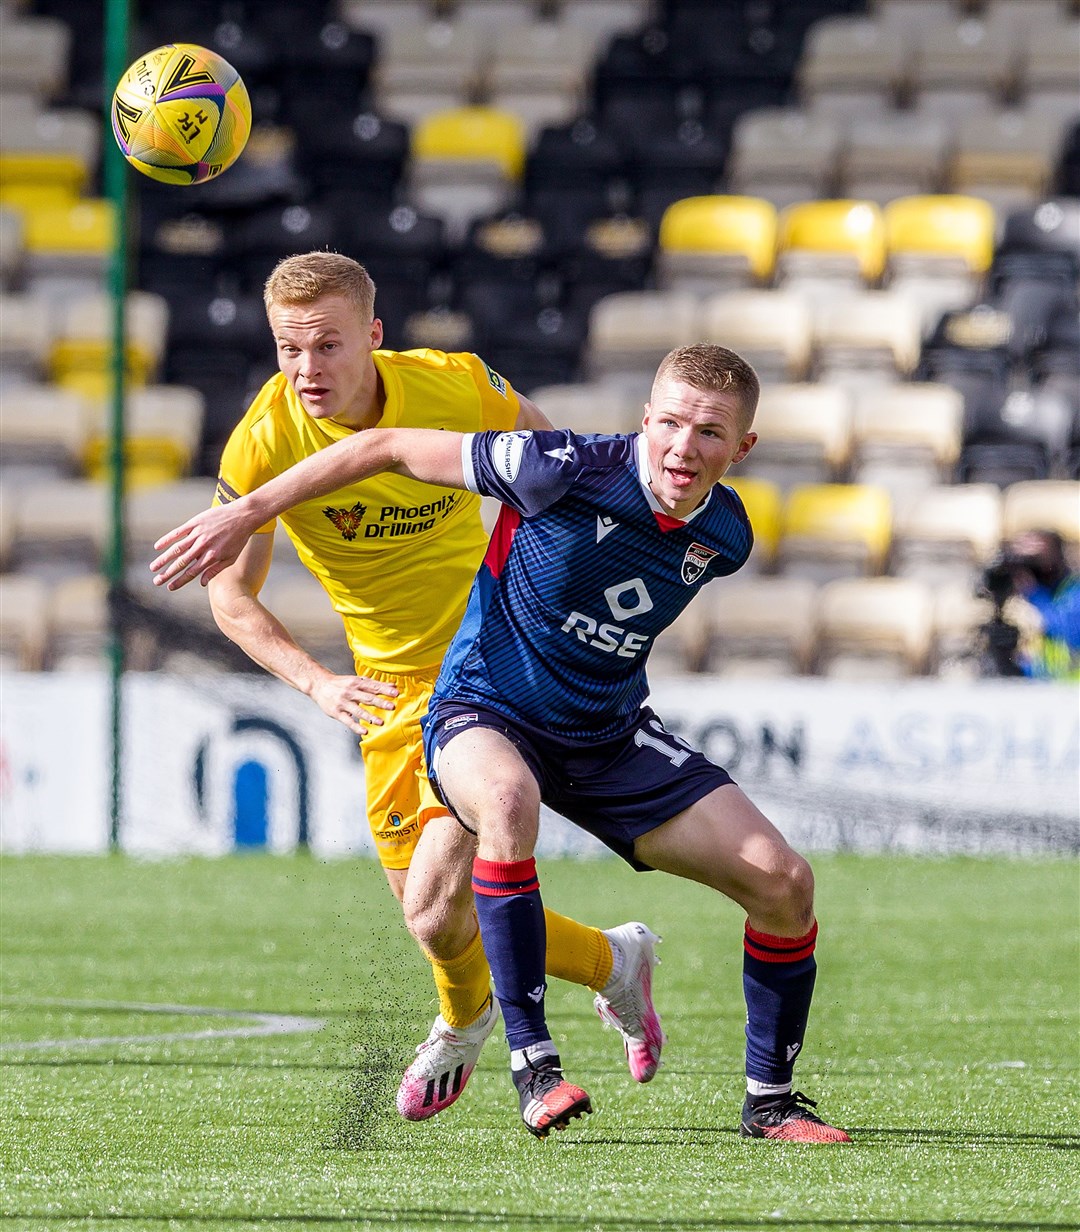 Picture - Ken Macpherson, Inverness. Livingston(1) v Ross County(0). 29.08.20. Ross County's Stephen Kelly fights for the ball with Livingston's Scott Tiffoney.